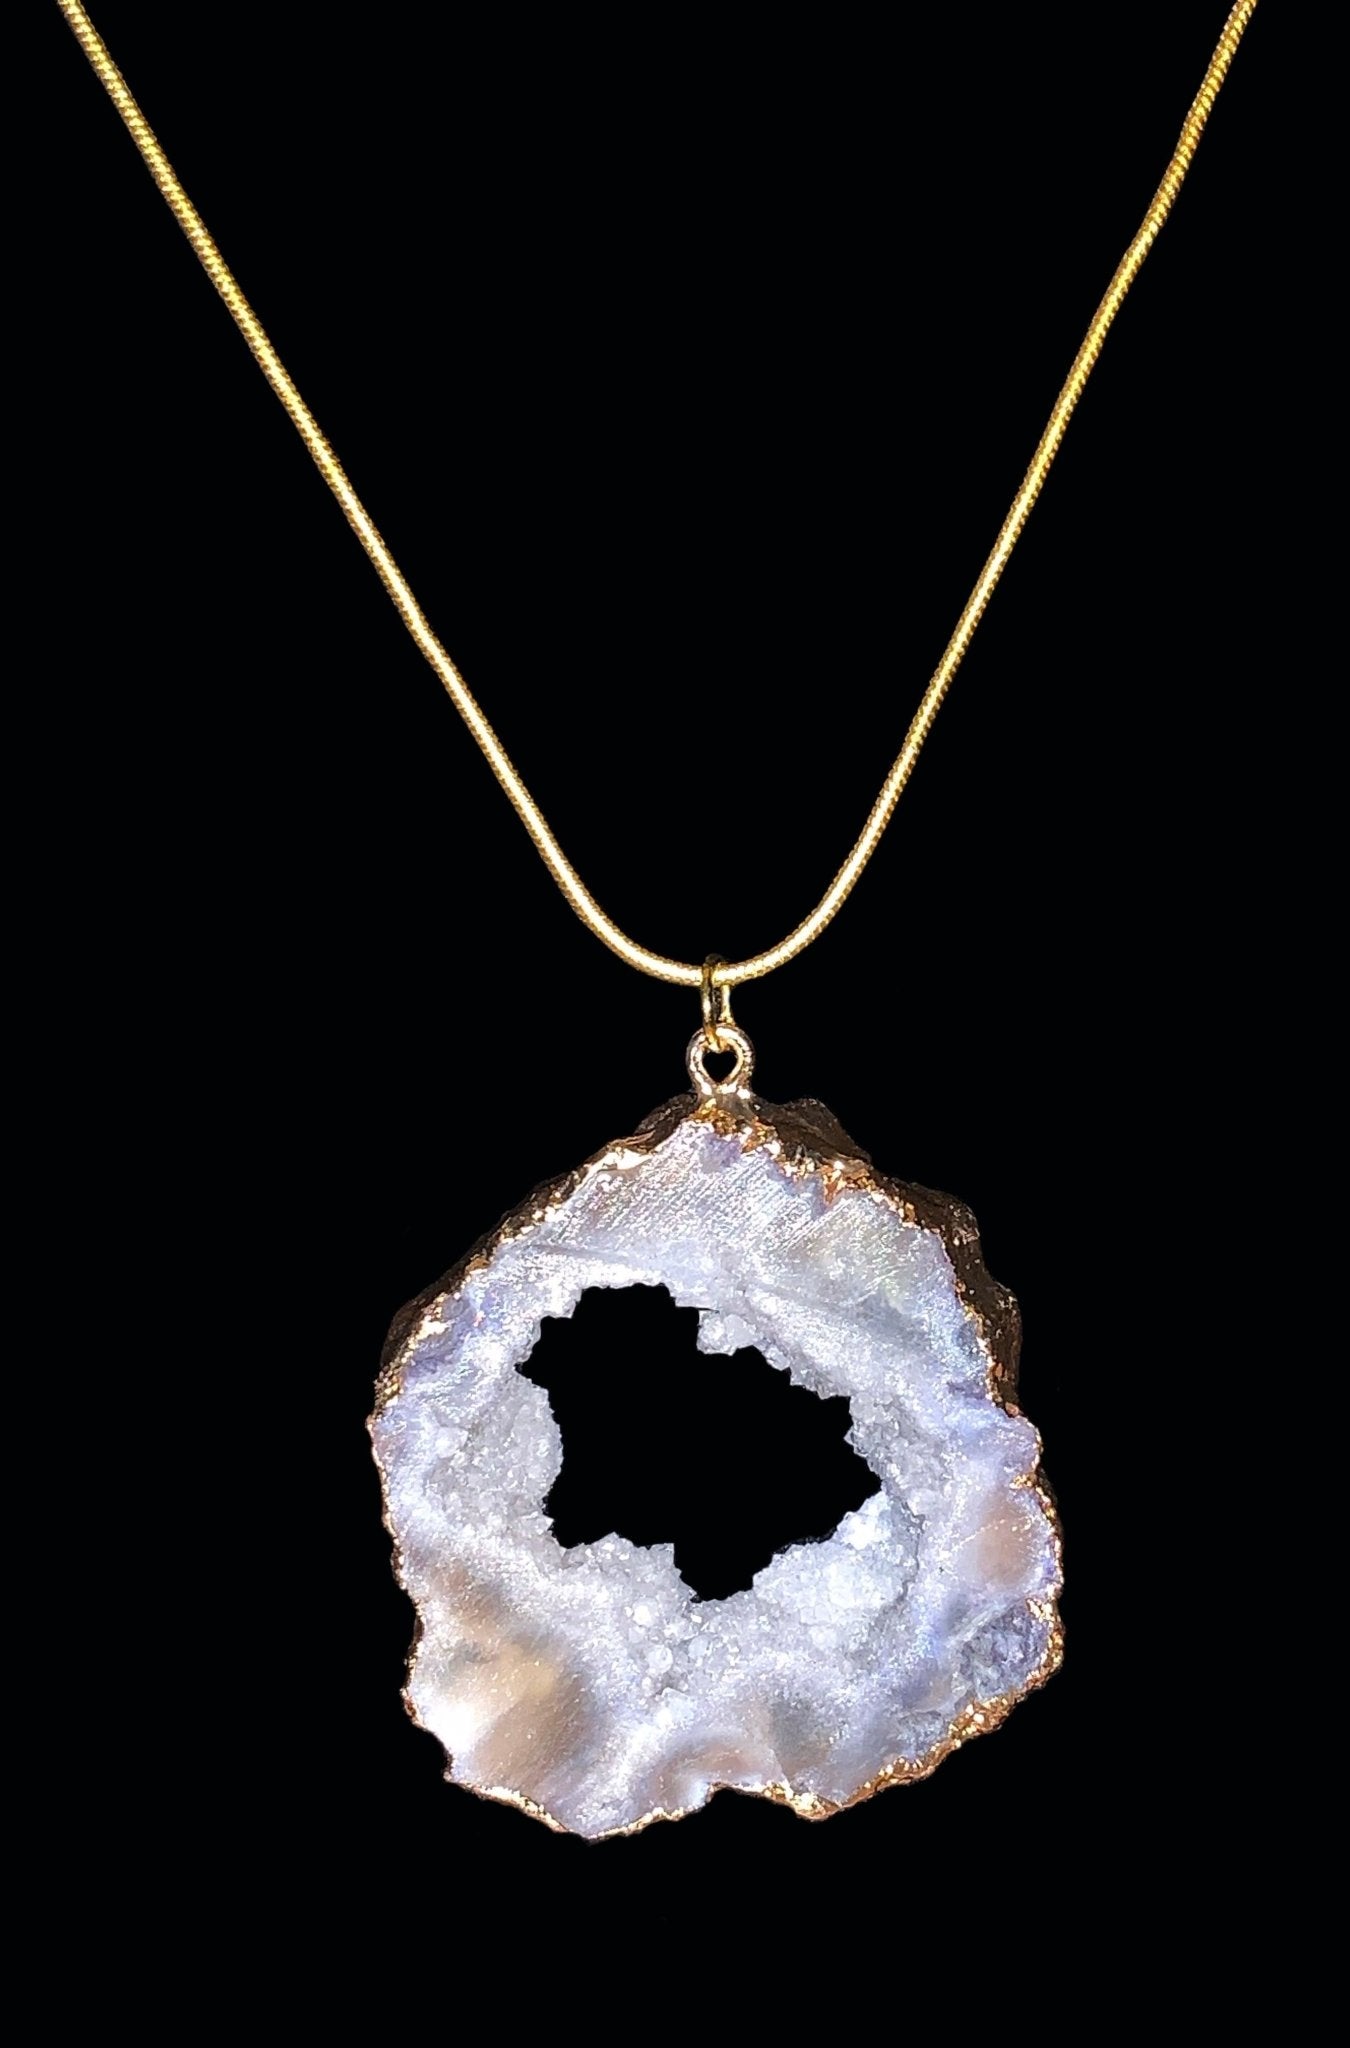 🔴SOLD🔴 Minerva Druzy Pendant Necklace on Gold Plated Snake Chain - Born Mystics